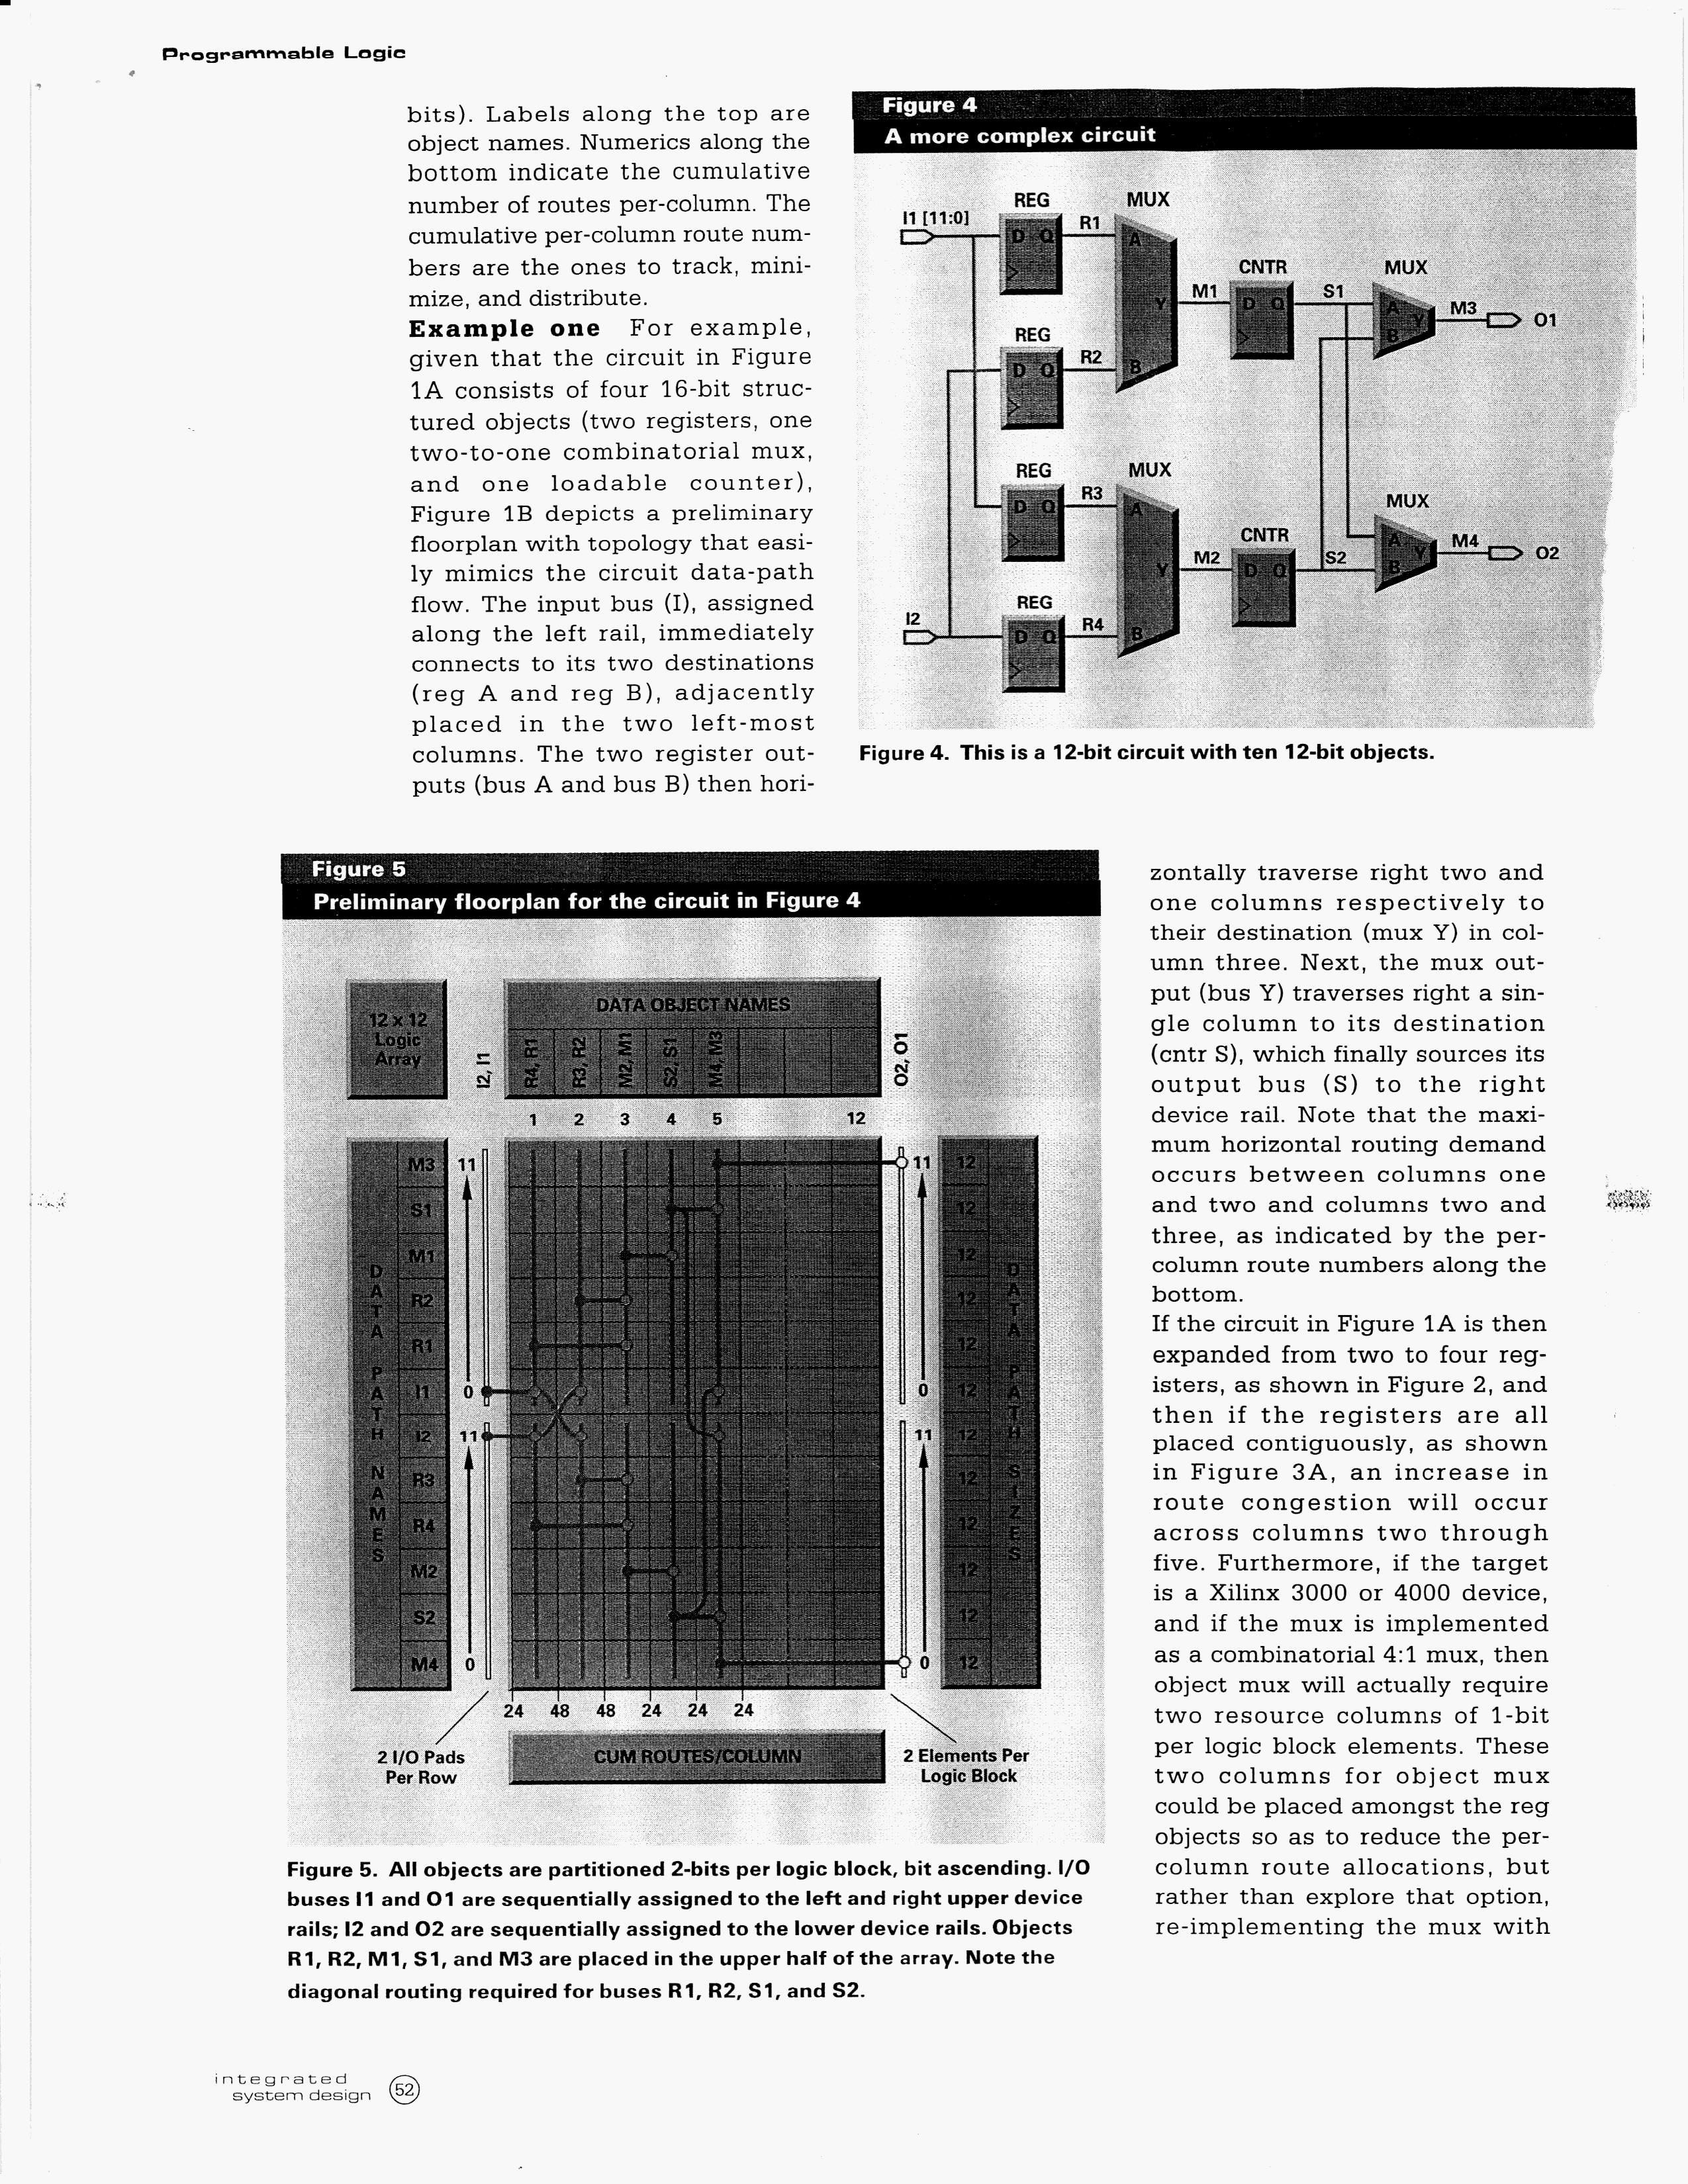 * Floorplanning for High-Performance FPGA Designs, Stephen Wasson, March 1995, Integrated System Design page 4 *